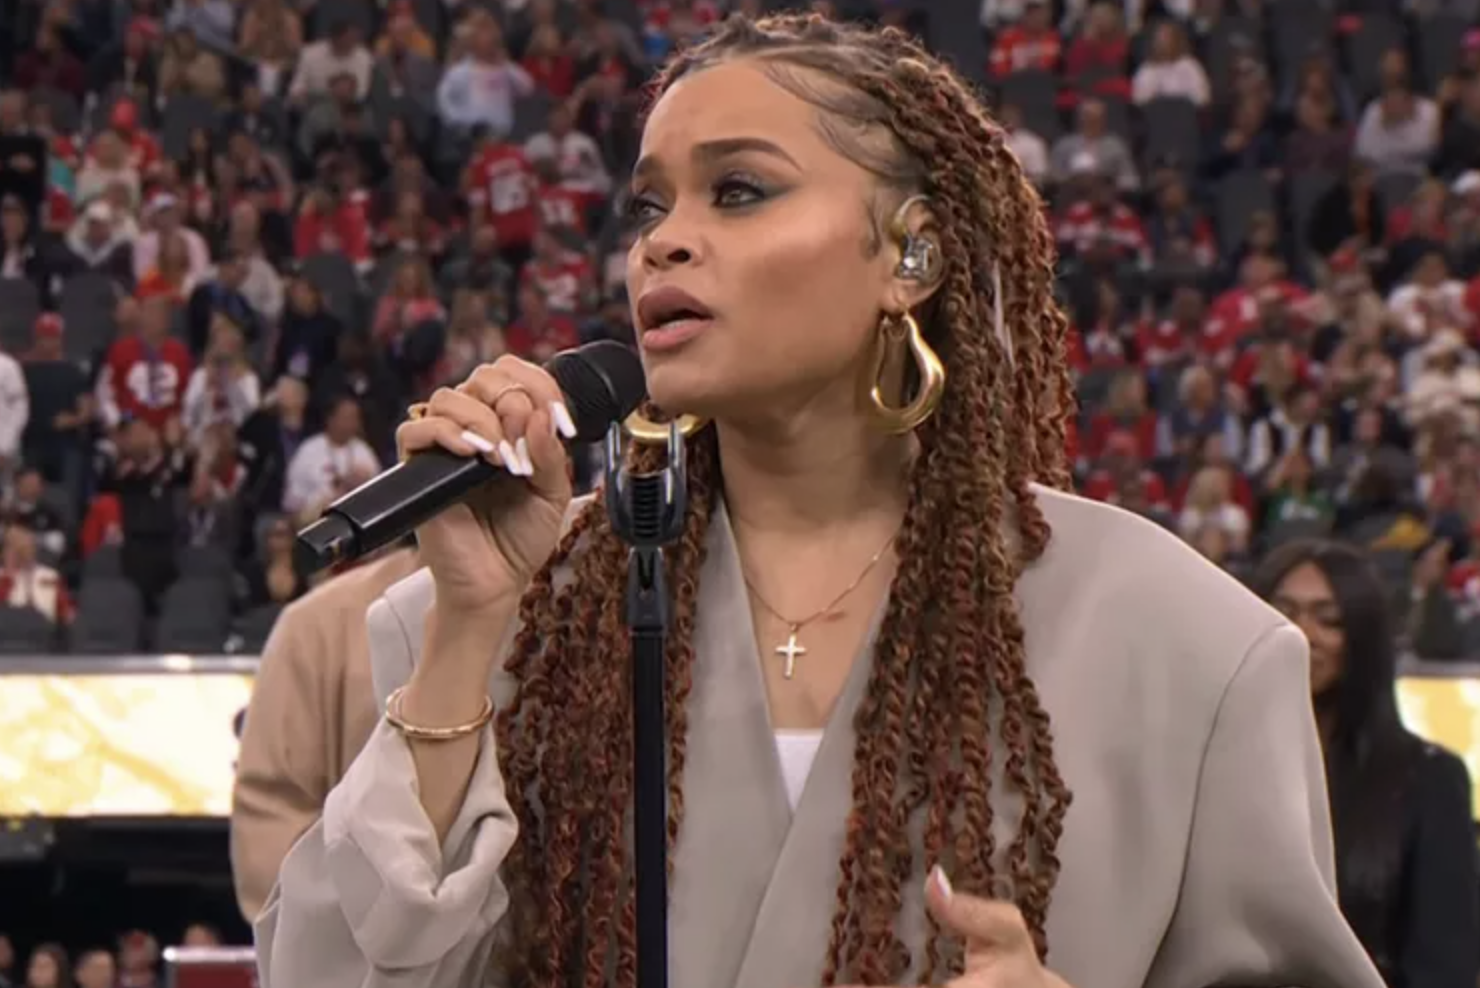 Andra Day’s Stirring Performance of ‘Lift Every Voice and Sing’ Sets the Tone Before Super Bowl Kickoff.